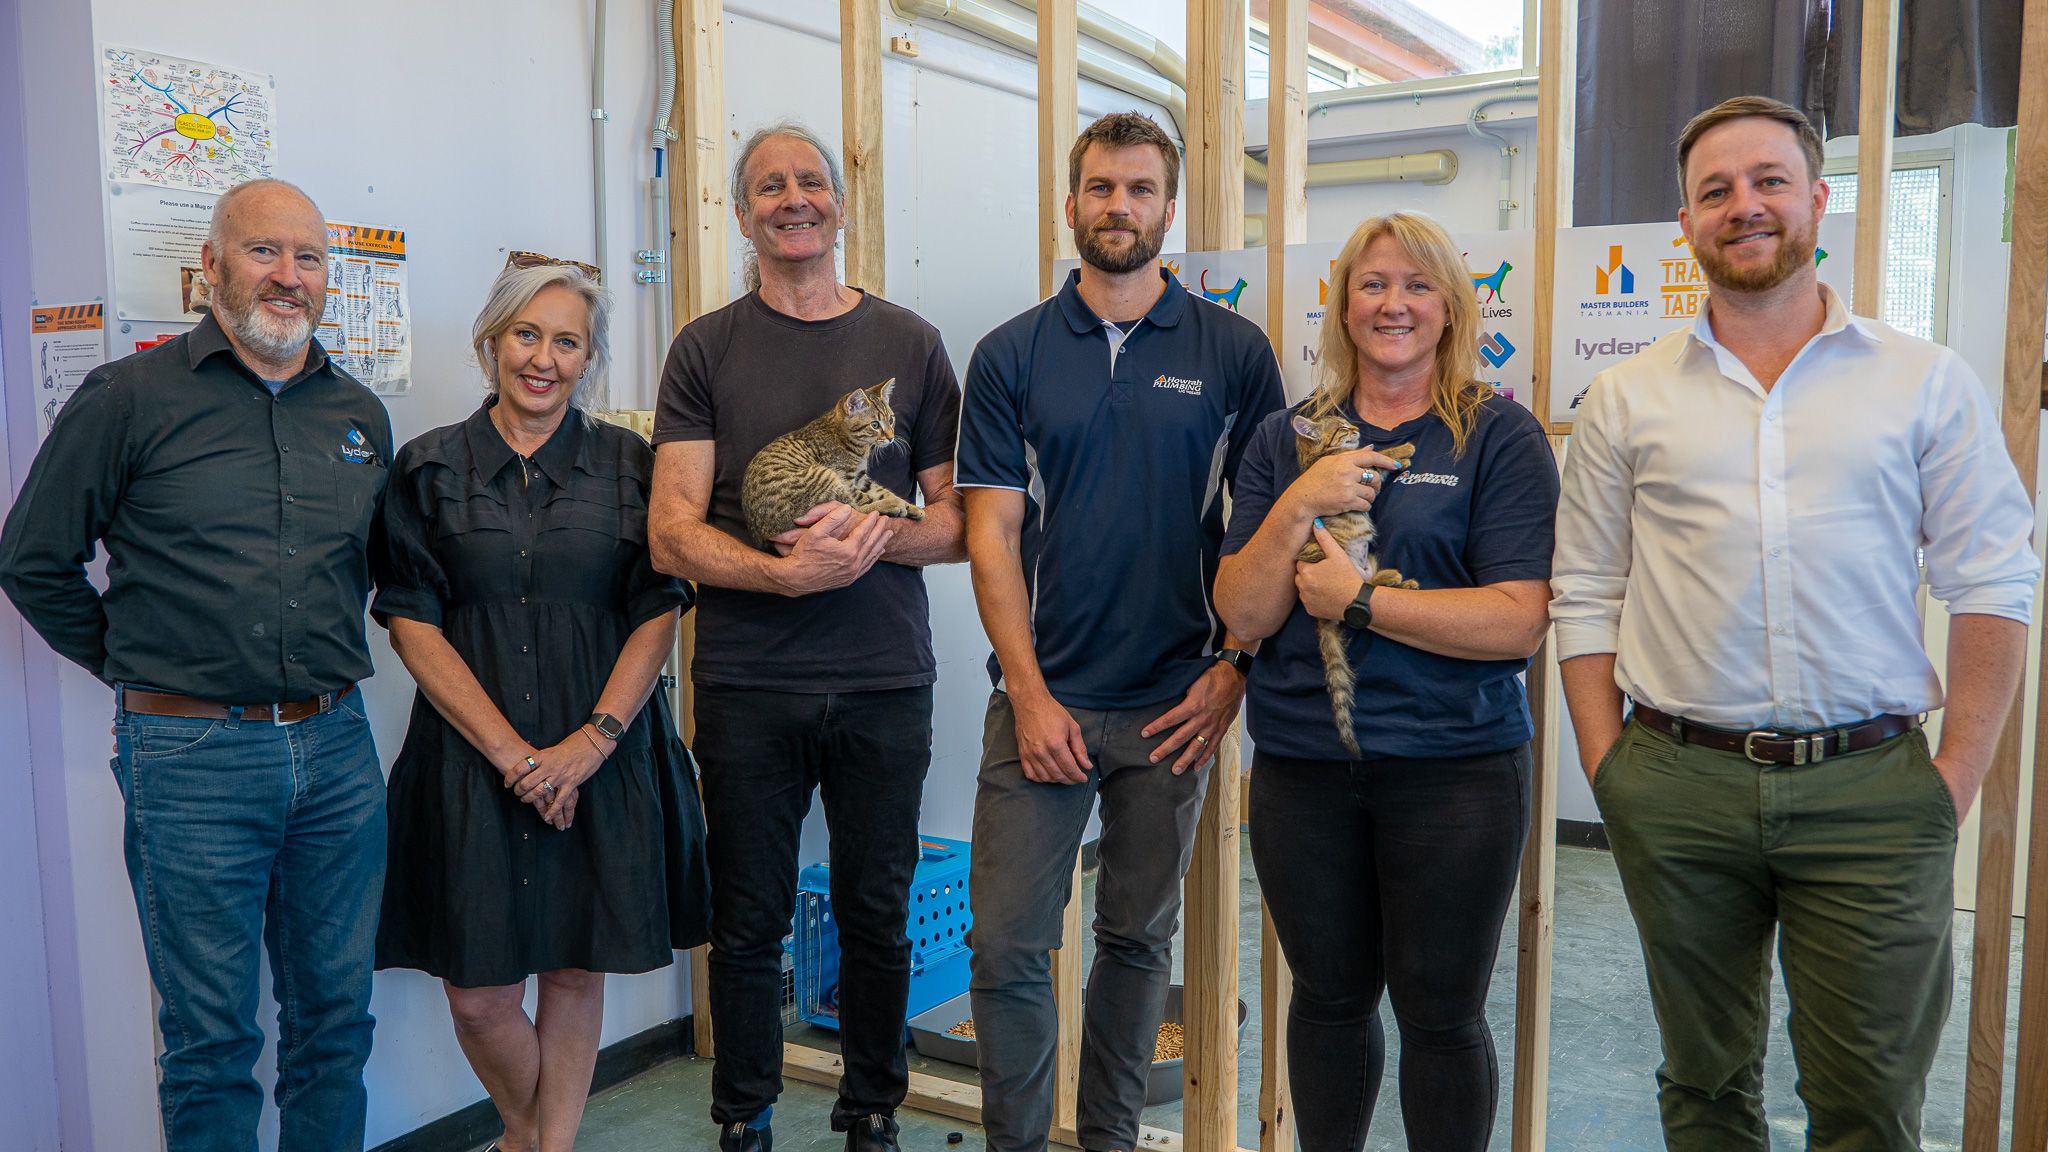 Tradies for Tabbies Launch: (L-R) Andrew Lyden of Lyden Builders, Ten Lives Ambassador Dave Noonan, x and Cathy McDowell of Howrah Plumbing and Matthew Pollock CEO Master Builders Tasmania